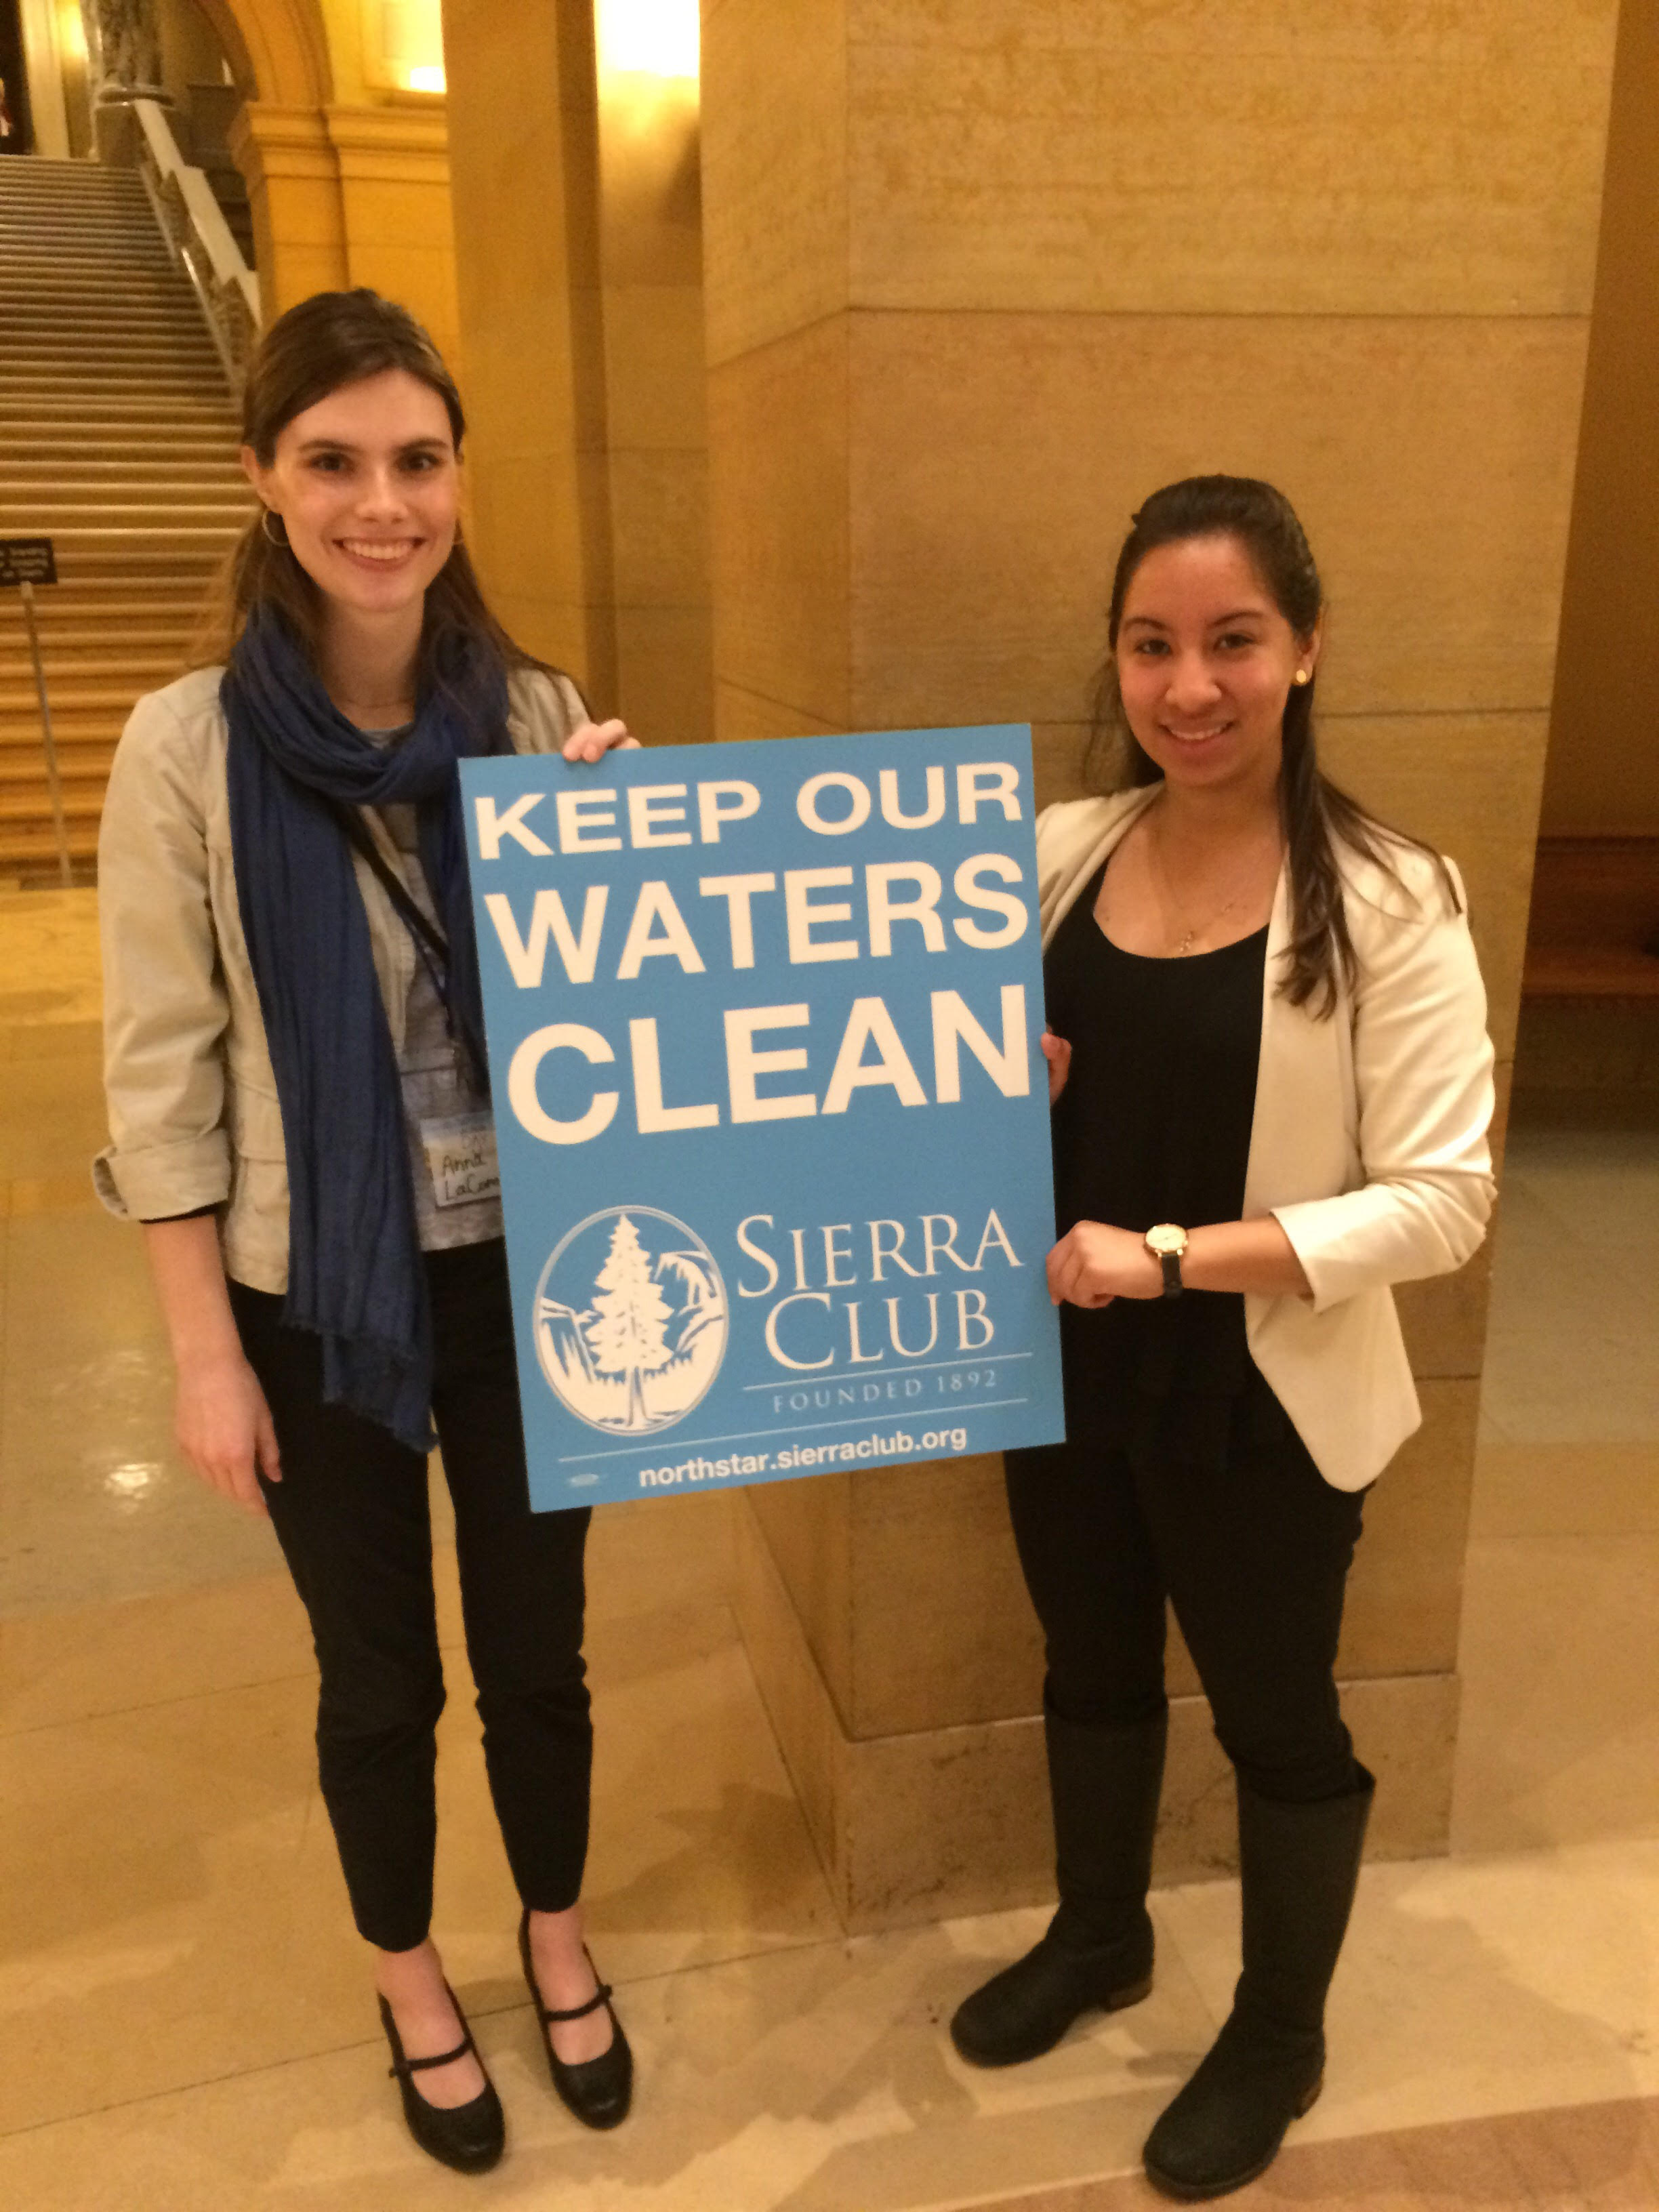 Sierra Club interns Anna LaCombe and Claudia Sanchez-Santoyo rally for clean water.